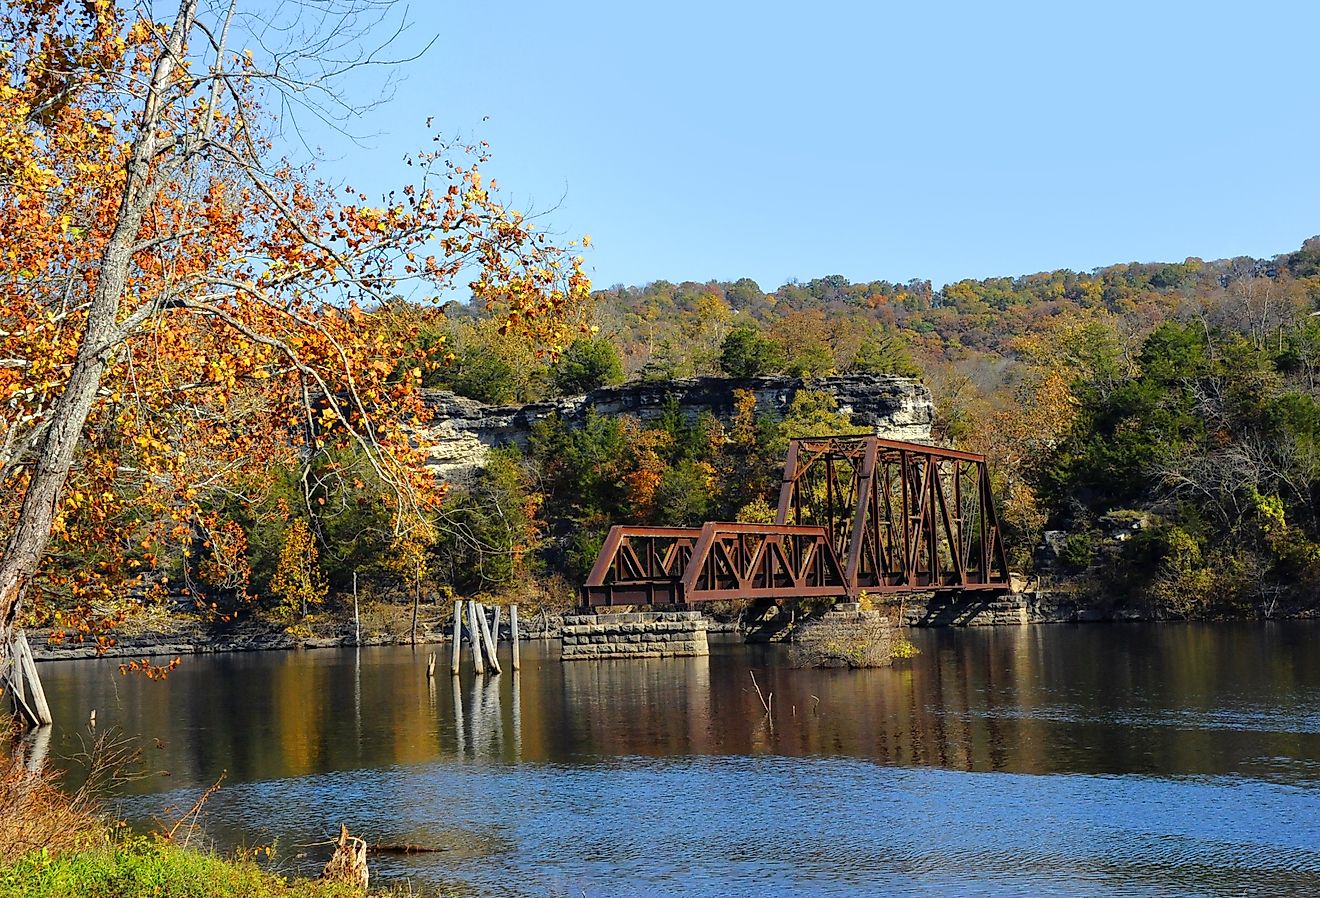 Remains of the Eureka Springs and North Arkansas Railway bridge ends in the middle of Table Rock Lake by Eureka Springs.